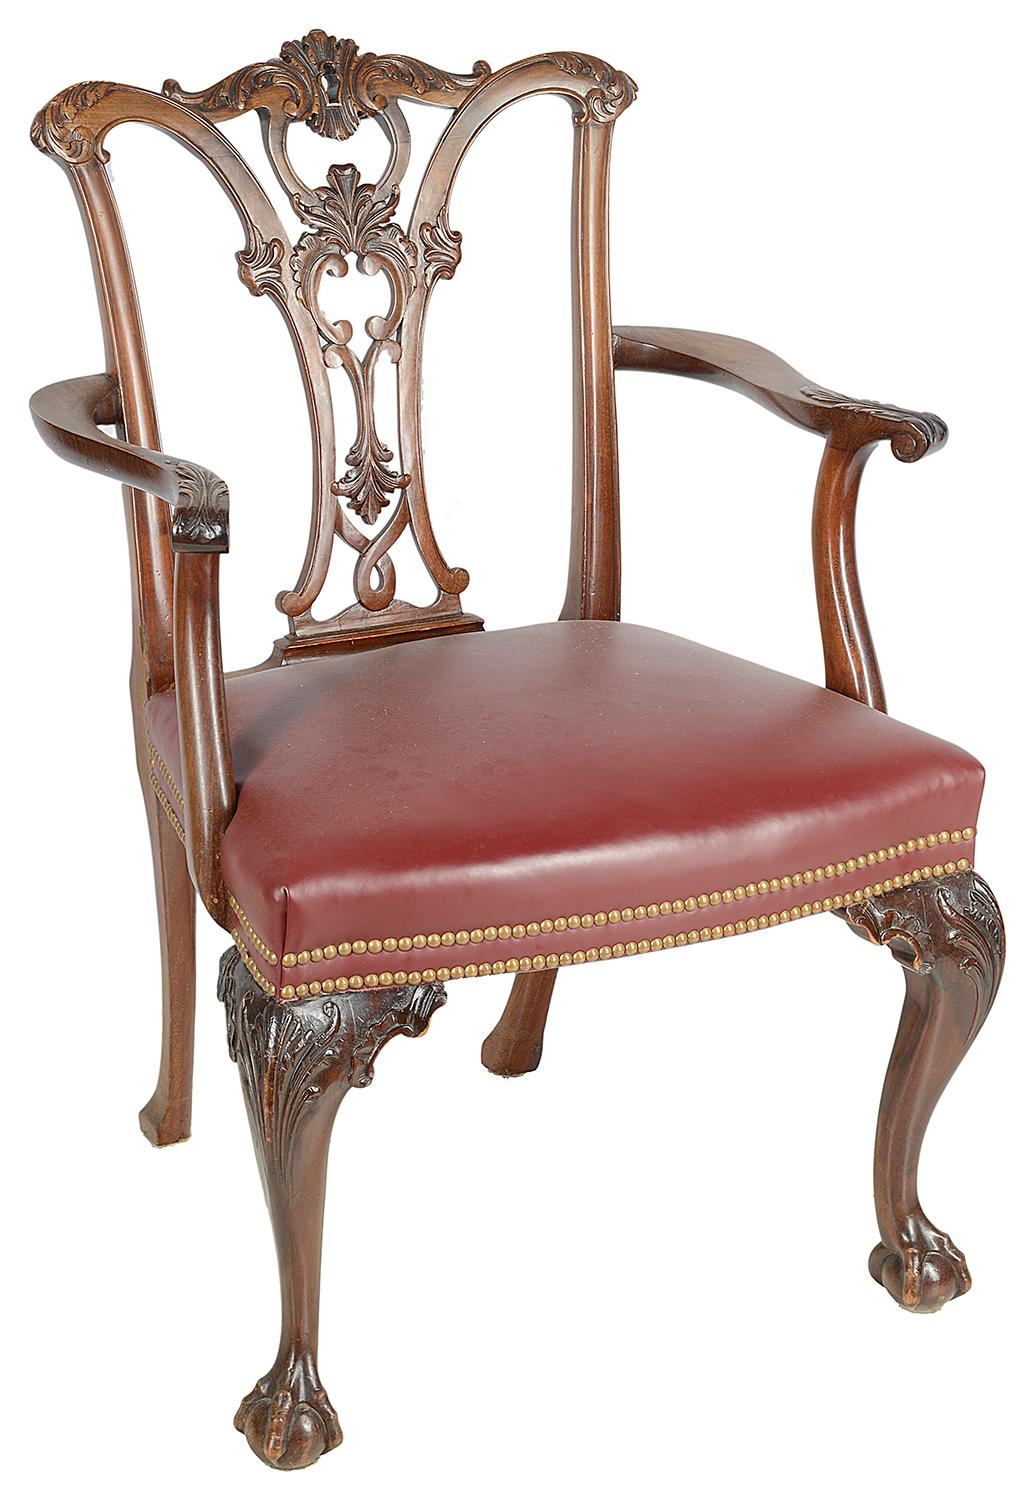 A good quality set of twelve (10 + 2 arms) late 19th century mahogany Chippendale style mahogany dining chairs, each having wonderful carved and fretted back splats of scrolls and foliage. Burgundy colour hide upholstered seats with two lines of